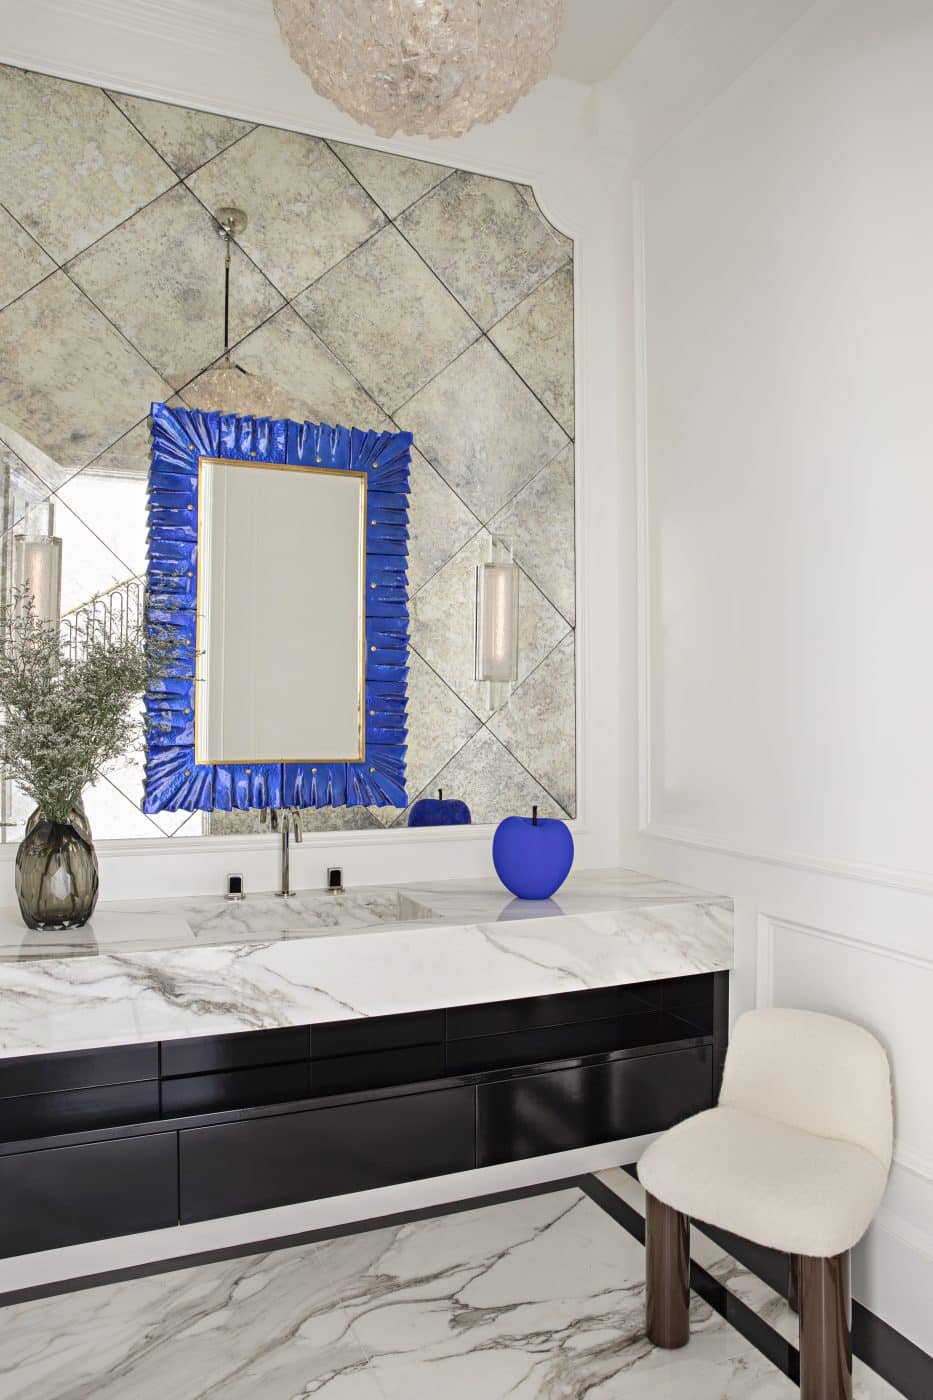 A vibrant blue mirror and velvet apple sculpture by Andrew Martin add a shock of color to a powder room